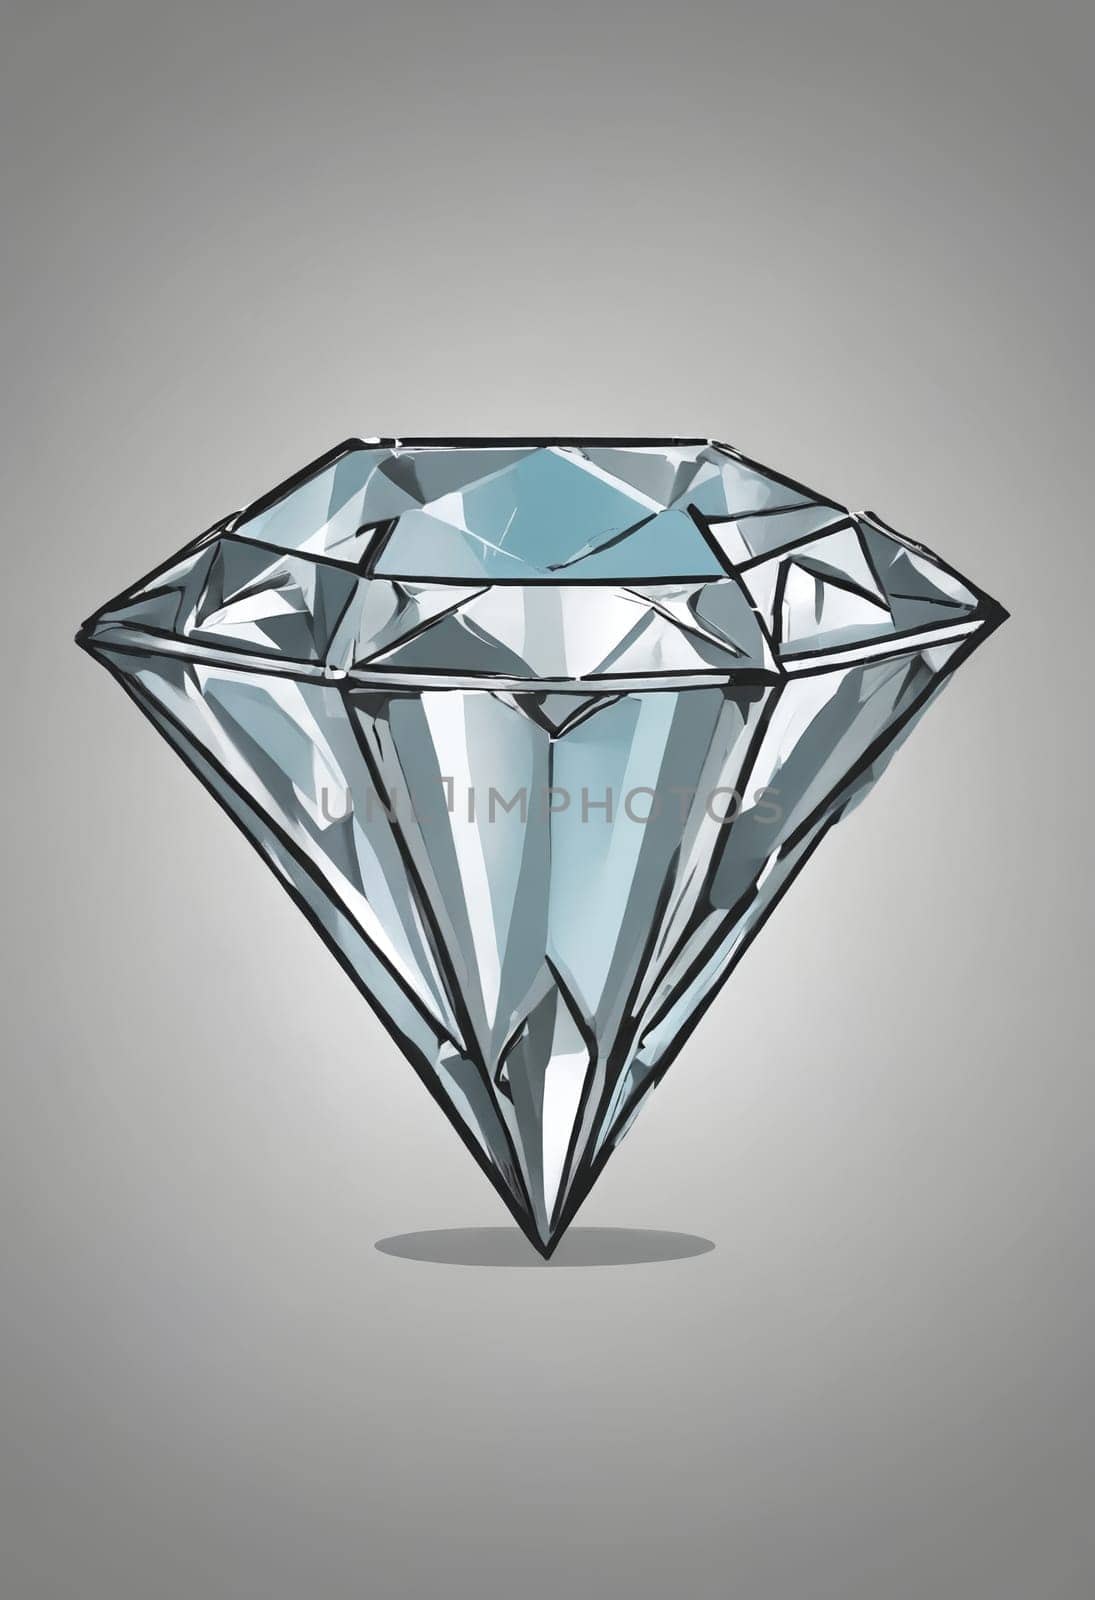 The epitome of luxury, this diamond illustration reflects nature's perfection.